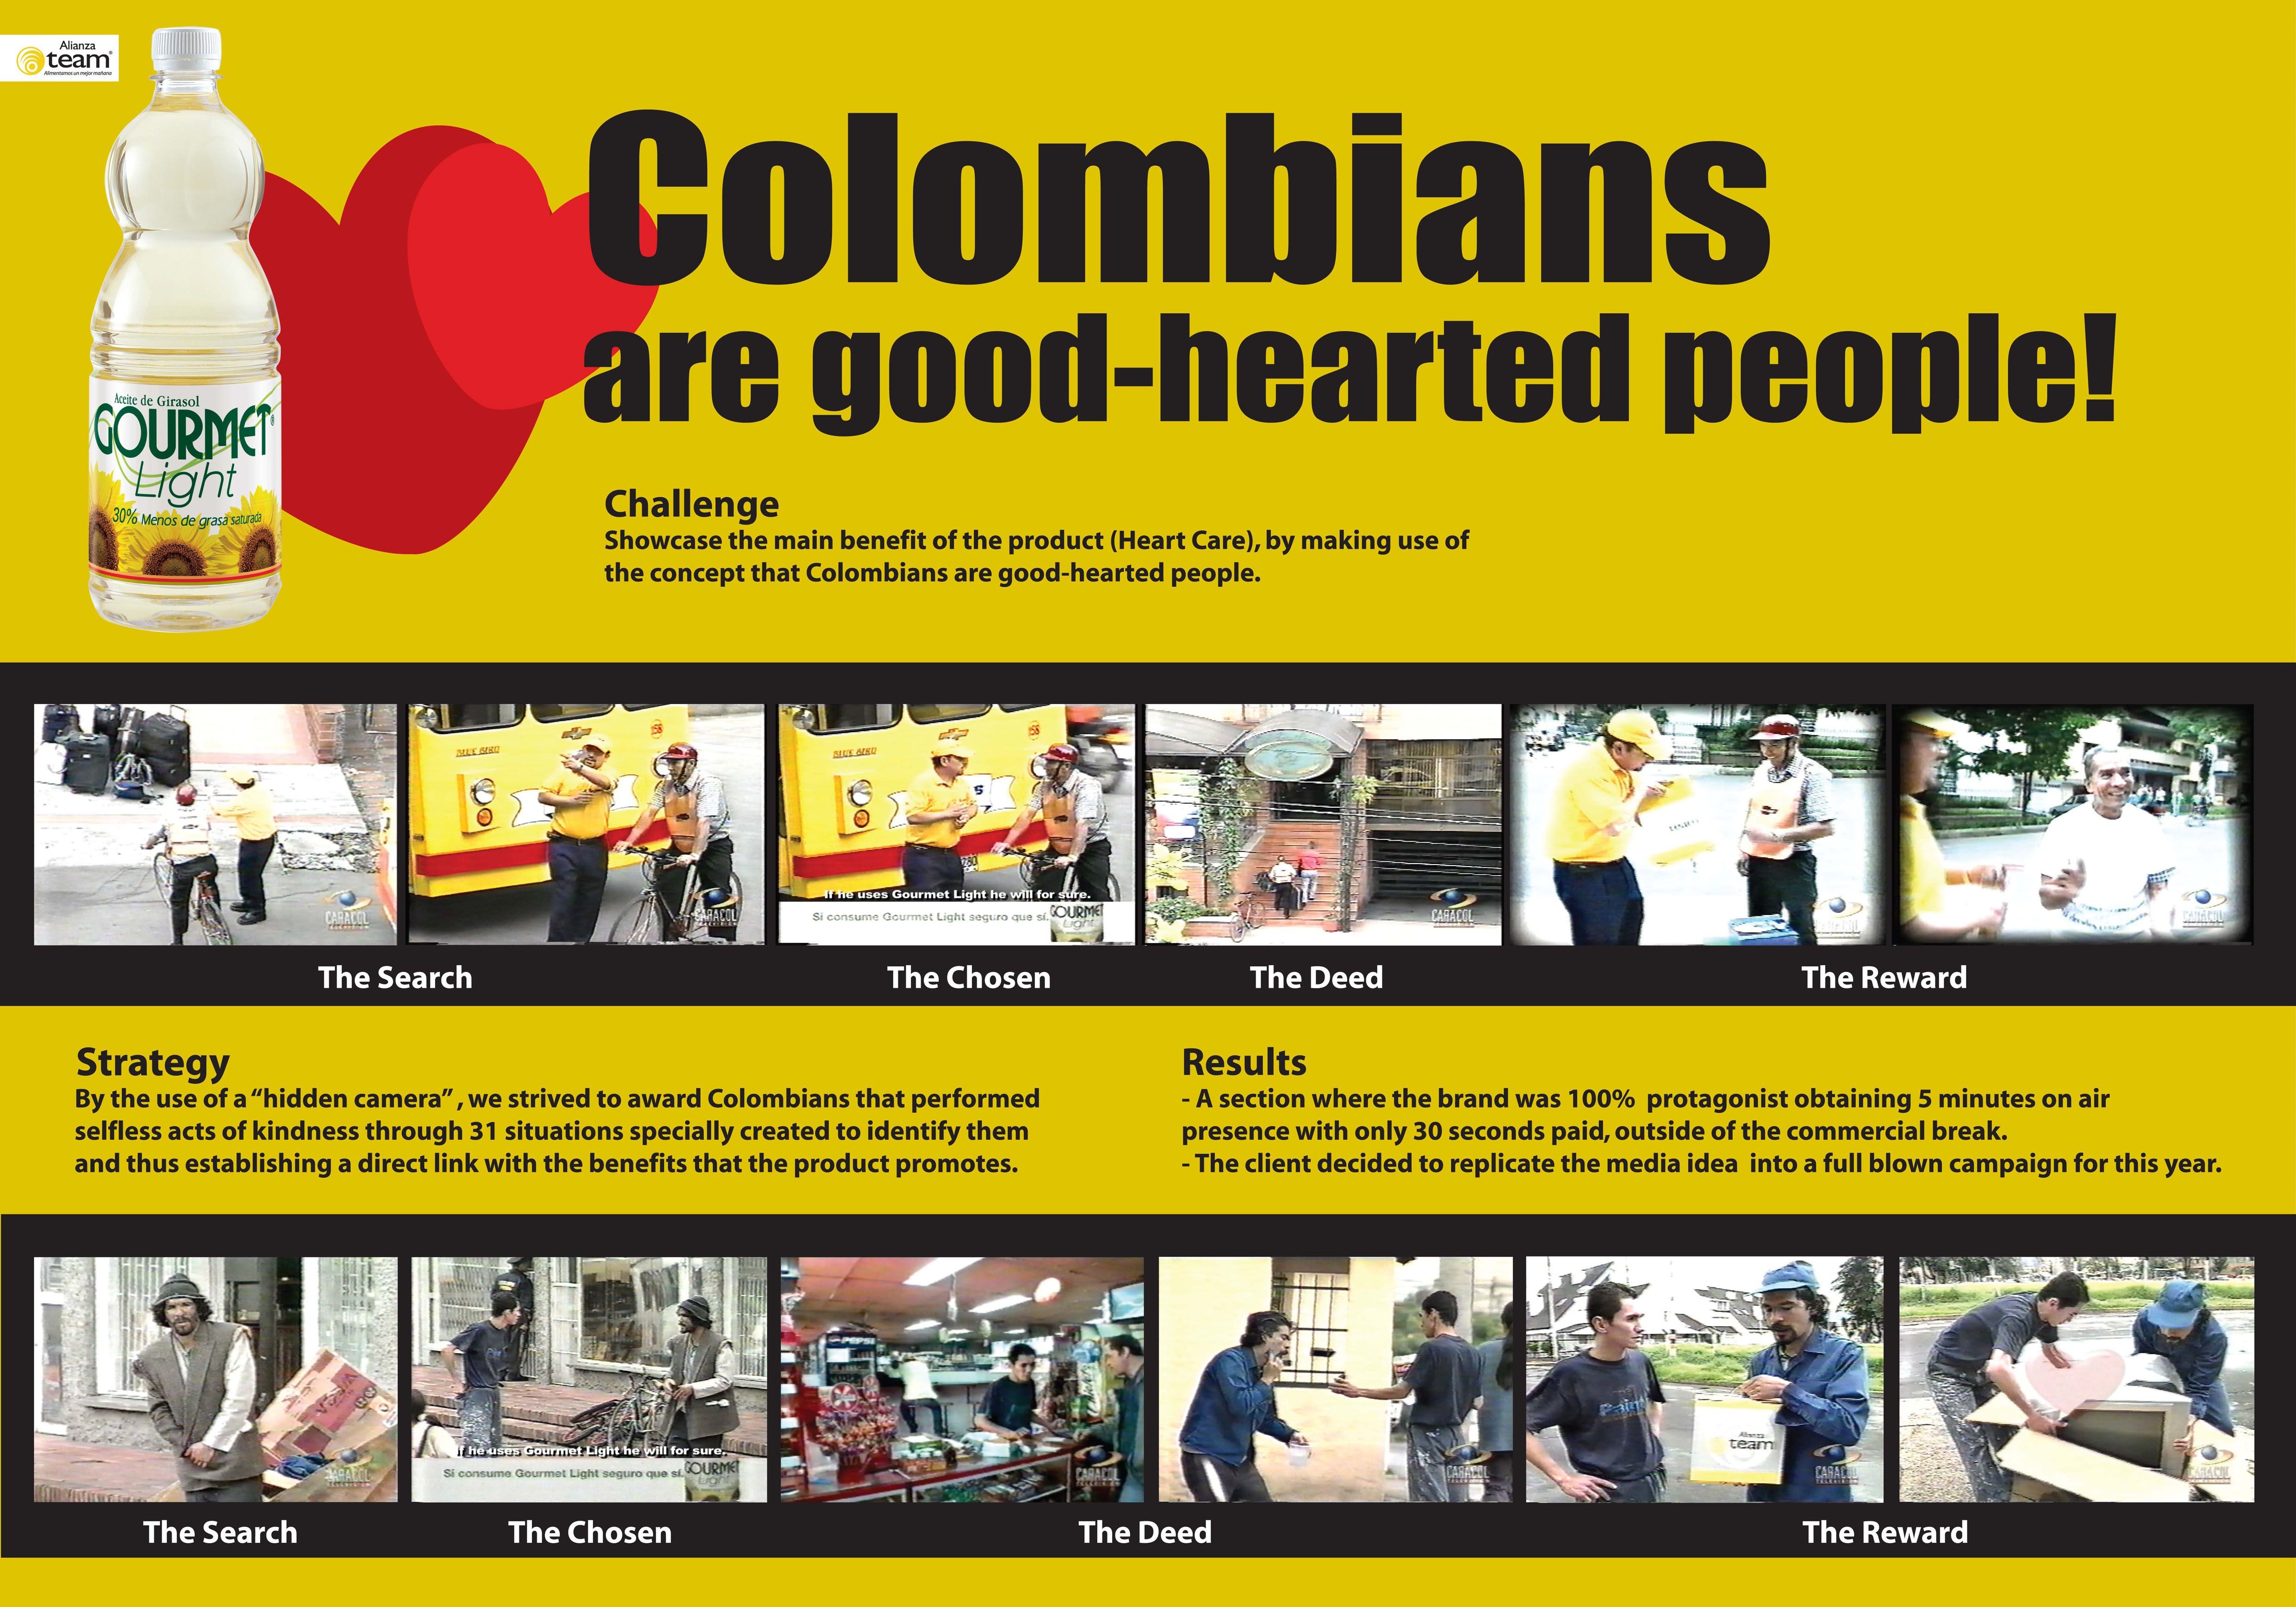 COLOMBIANS ARE GOOD HEARTED PEOPLE